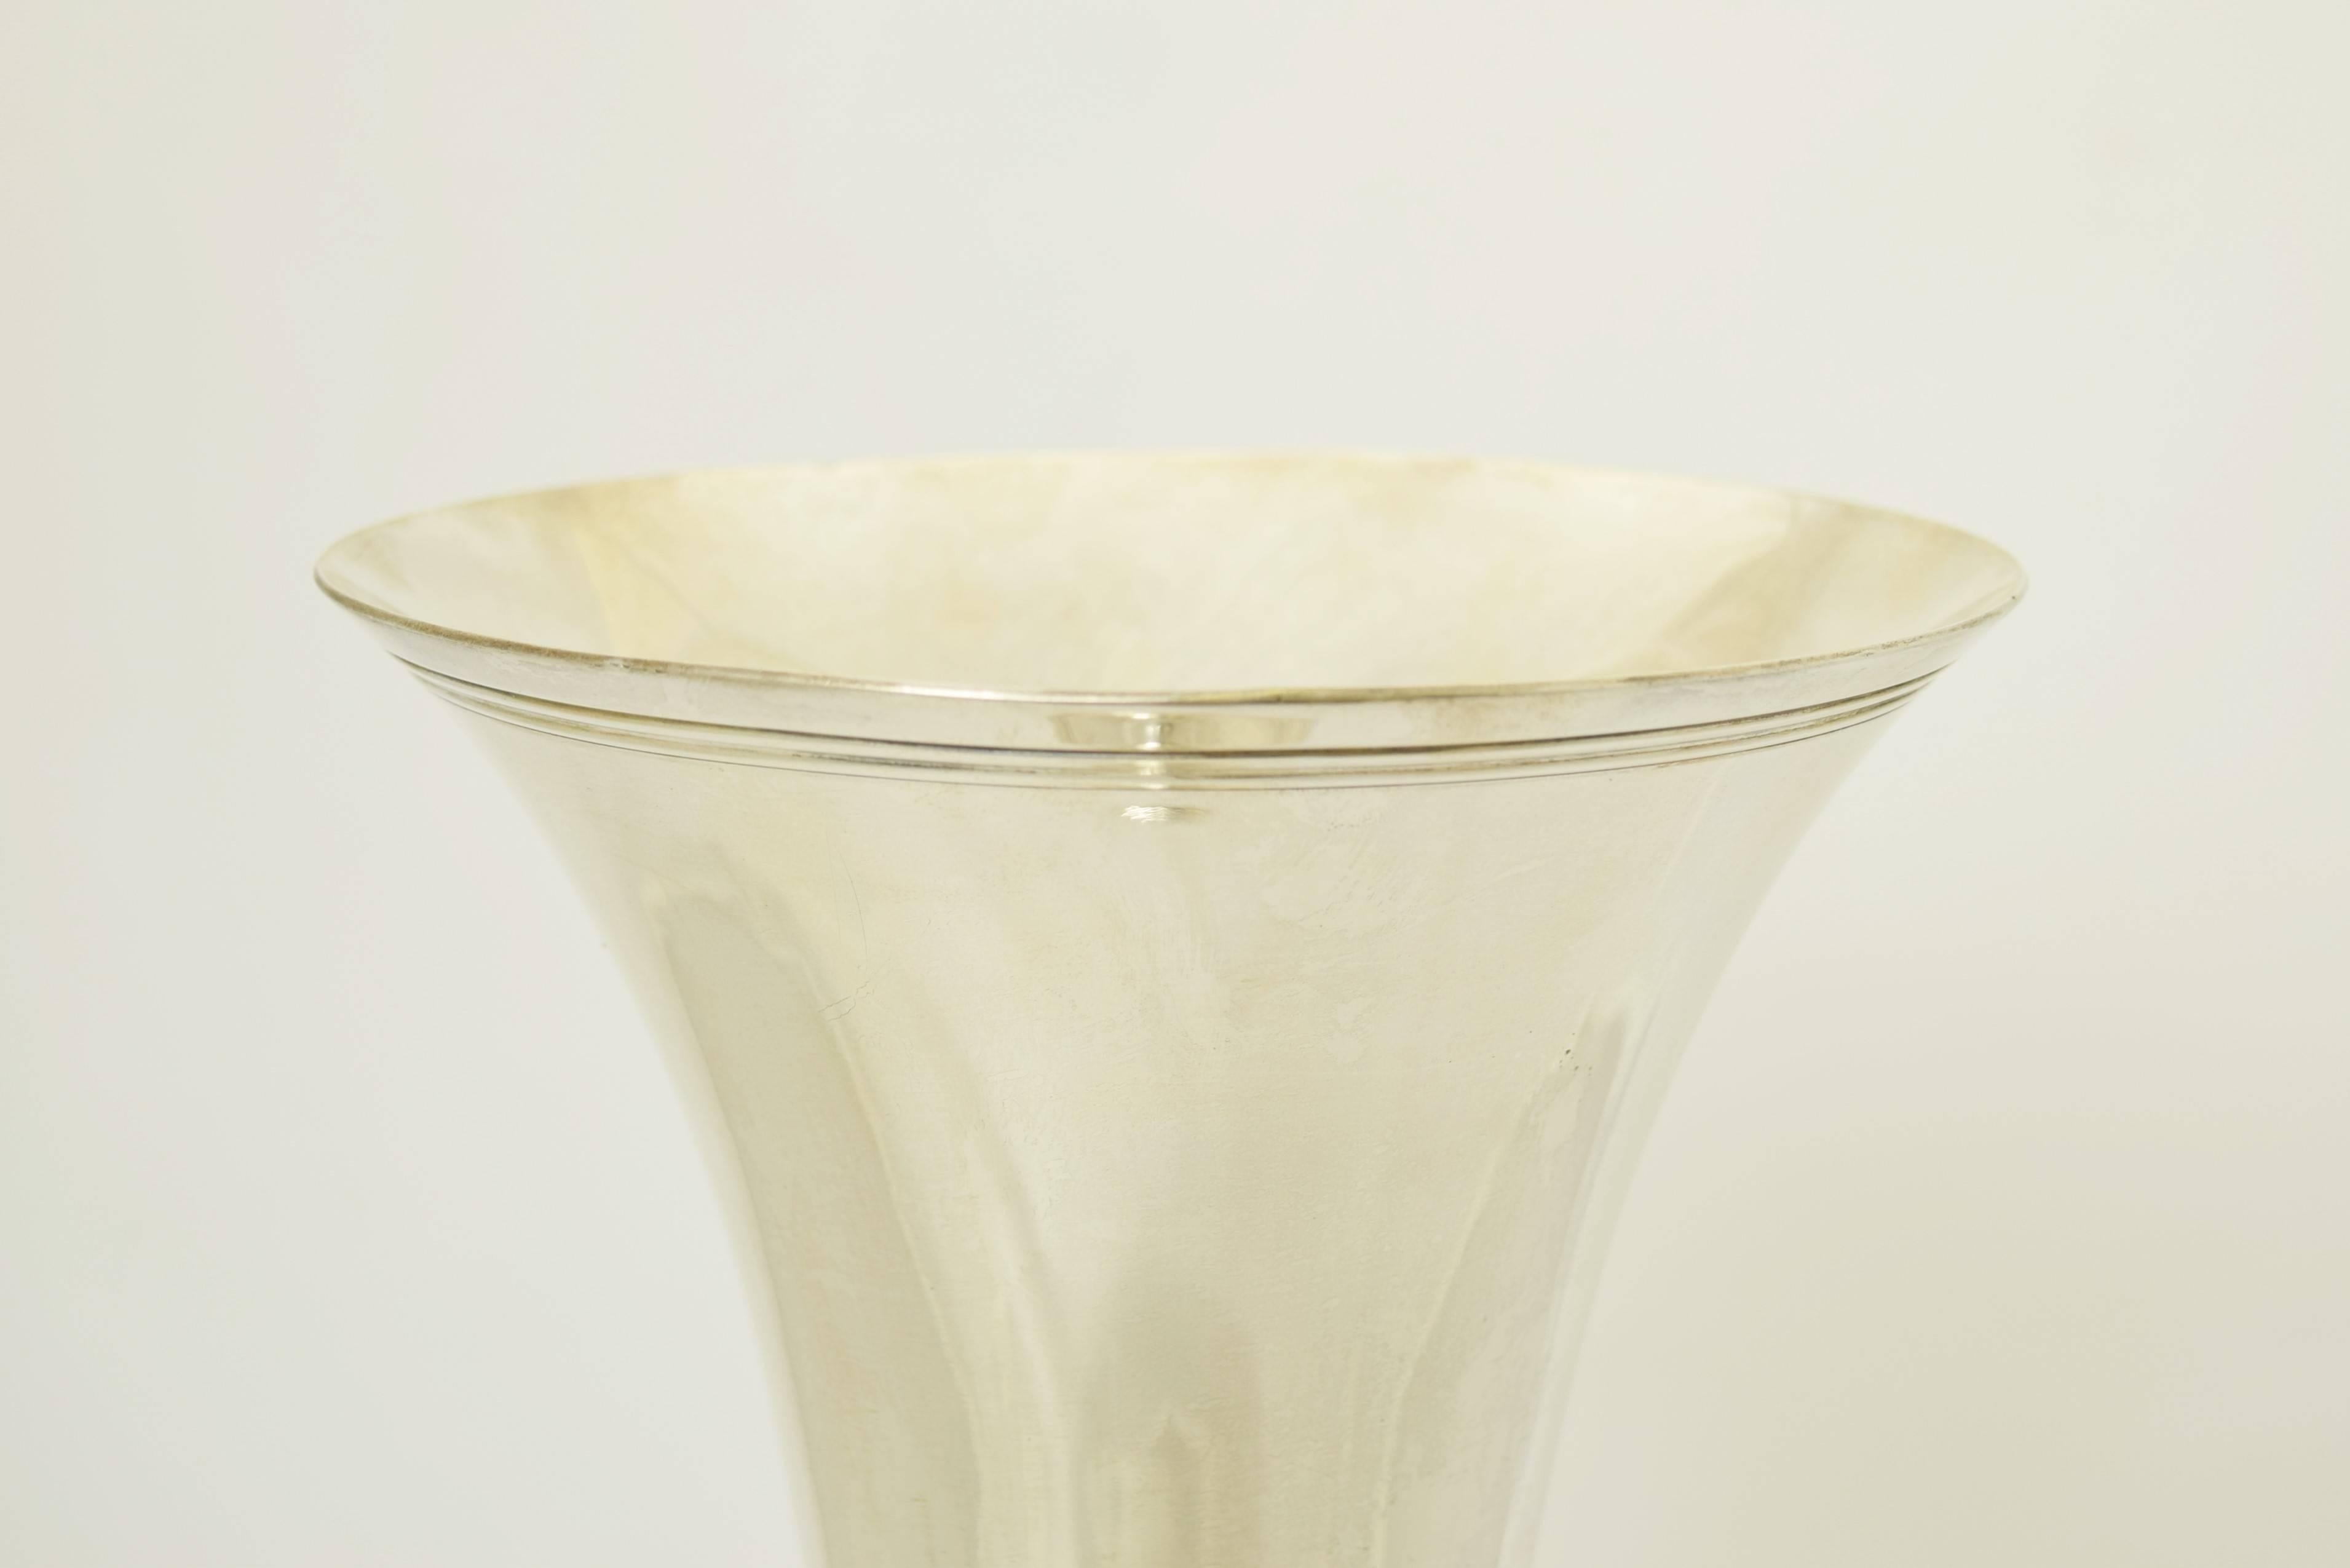 Being offered is a large sterling silver vase by Tiffany & Co. of New York. Of trumpet form with incised detail at the rim and base. Dimensions: 20 inches height. Marked as illustrated. In excellent condition.